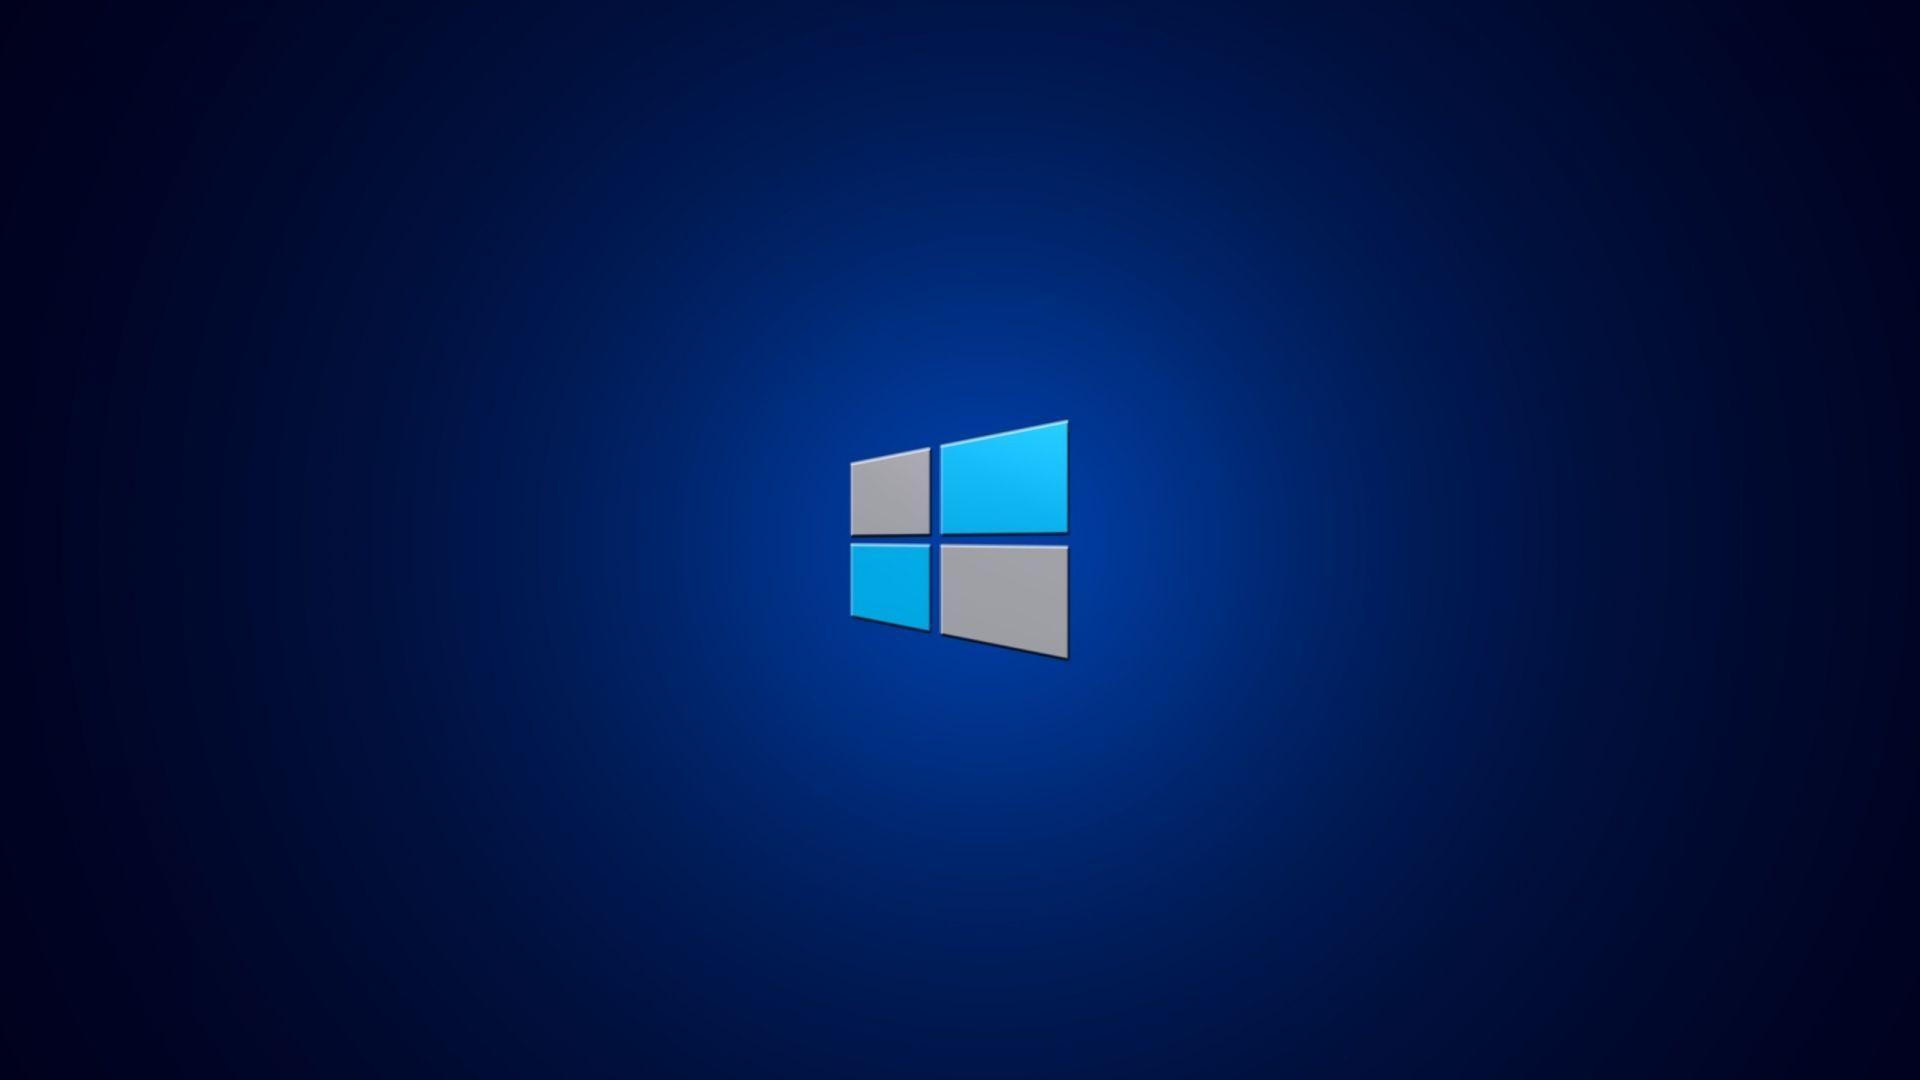 HD Wallpapers for Windows